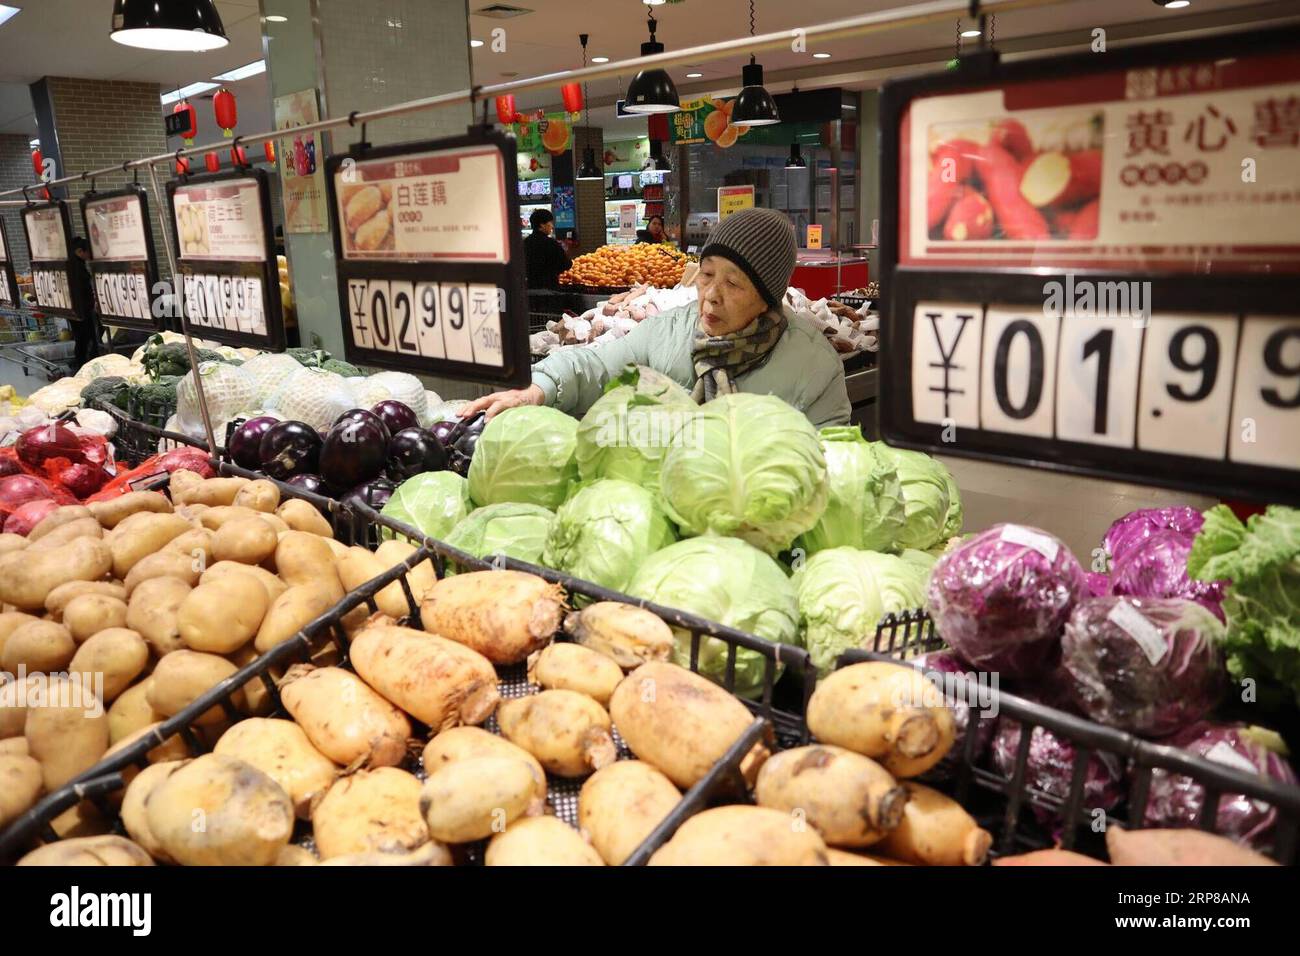 (190225) -- BEIJING, Feb. 25, 2019 -- A customer selects vegetables at a supermarket in Handan, north China s Hebei Province, Dec. 9, 2018. China has unveiled a guideline to enhance the accountability system of local governments to strengthen supervision over food safety. Food safety will be included in the performance assessment of the Party and government leading officials, according to the guideline released by the Central Committee of the Communist Party of China (CPC) and the State Council over the weekend. The guideline aims to promote local government s food safety work and improve peop Stock Photo